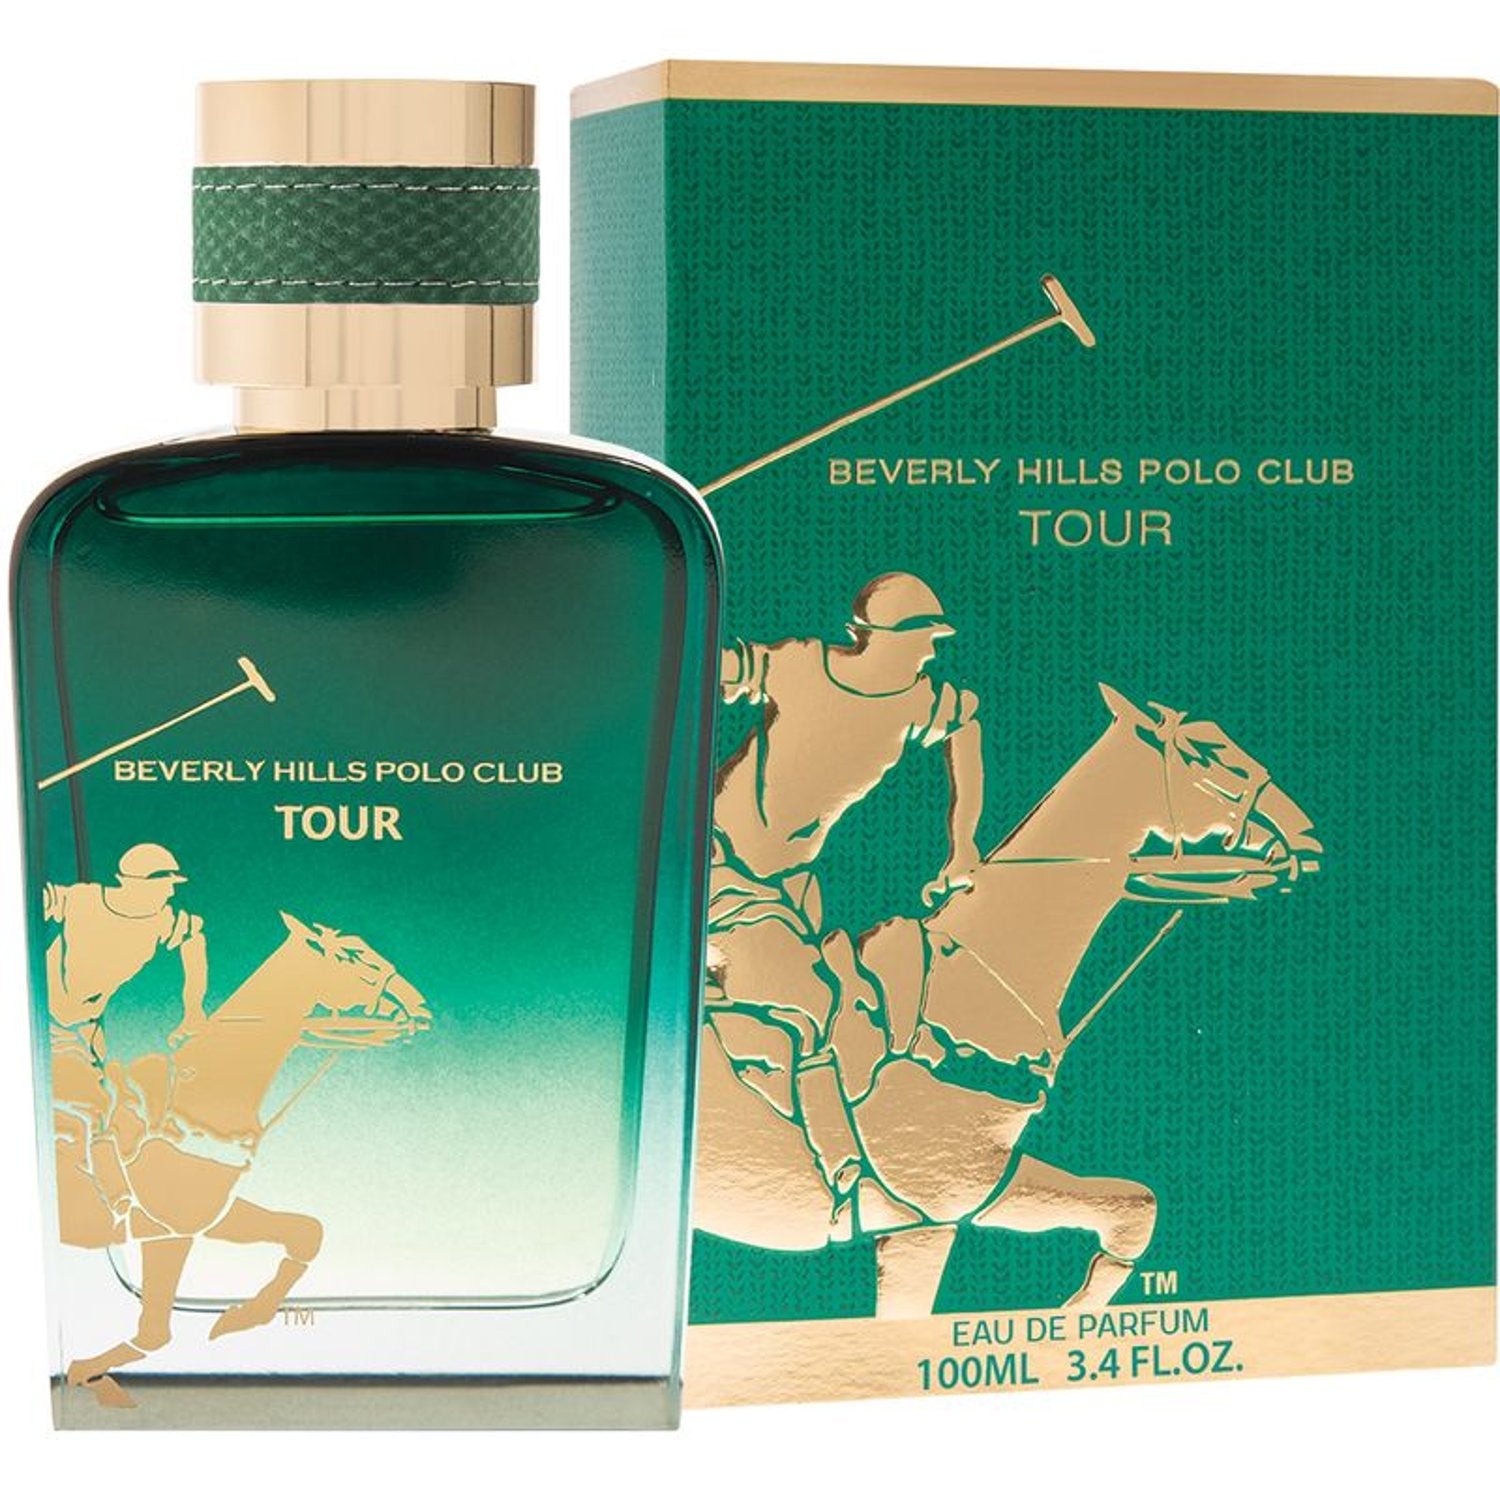 Beverly Hills Polo Club Tour Perfume For Men in Bahrain - Halabh